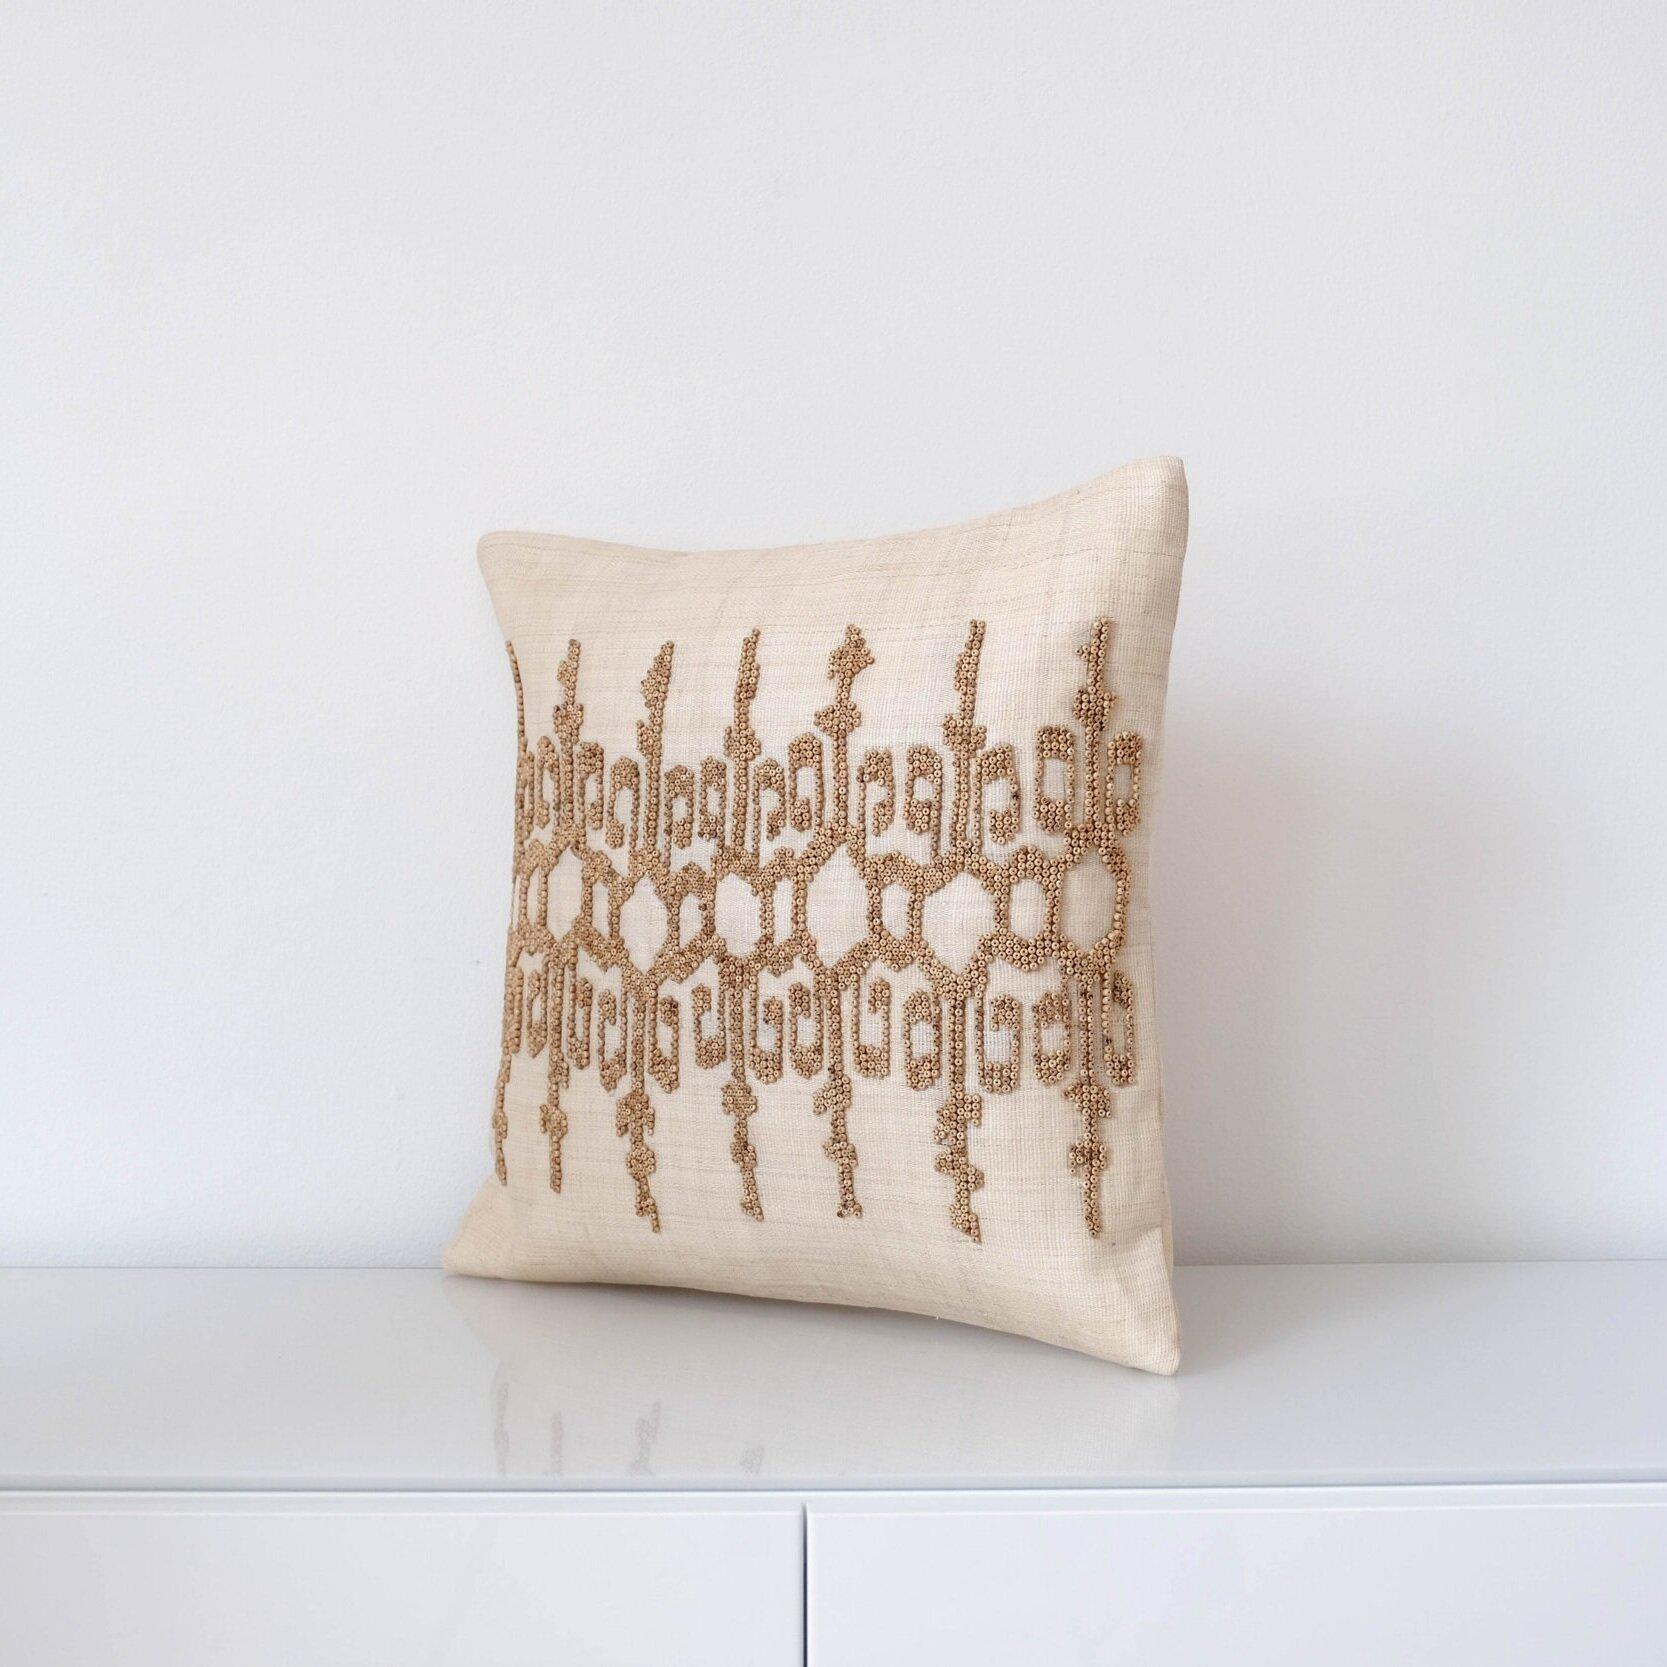 Handcrafted cushion cover made with naturally dyed and delicately woven T’nalak cloth from Abaca fibres and fastened with coconut shell buttons
Colour: light sand and oatmeal

45 x 45 cm
17.7? x 17.7?
Recommended cushion filler: 56 x 56 cm /